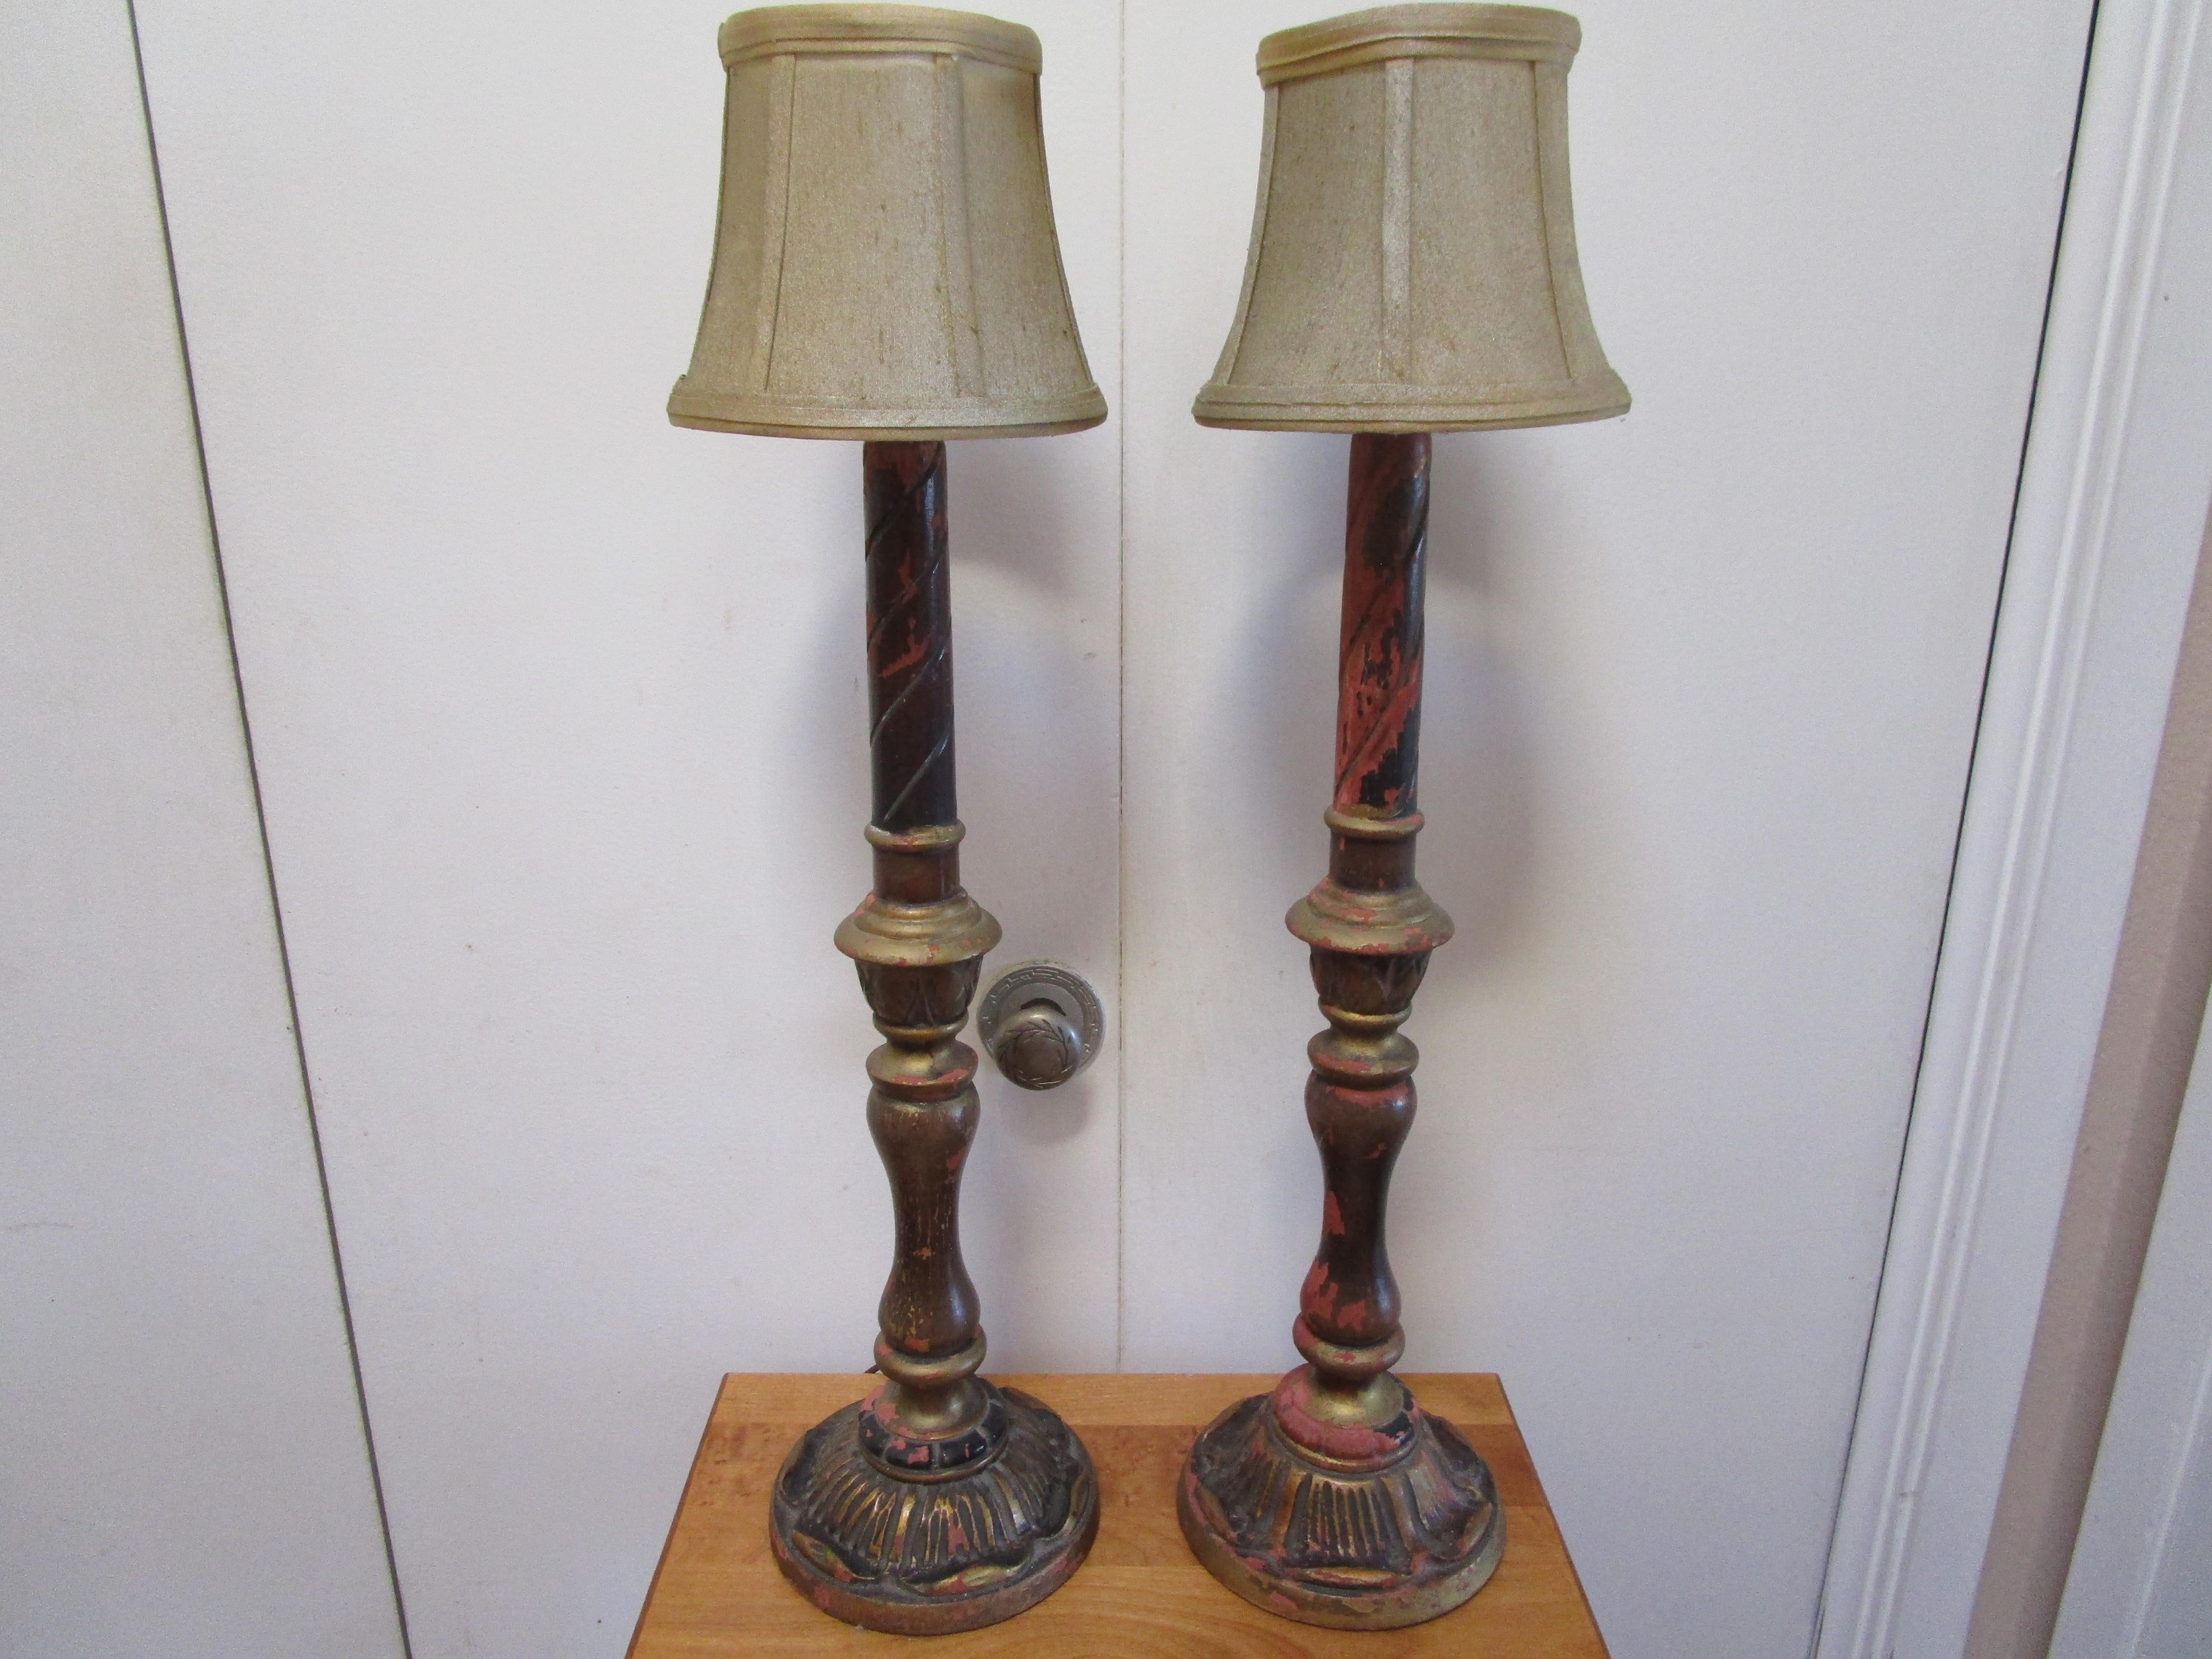 19th Century Italian Gilt Wooden Candlestick Converted Lamps In Good Condition For Sale In Lomita, CA